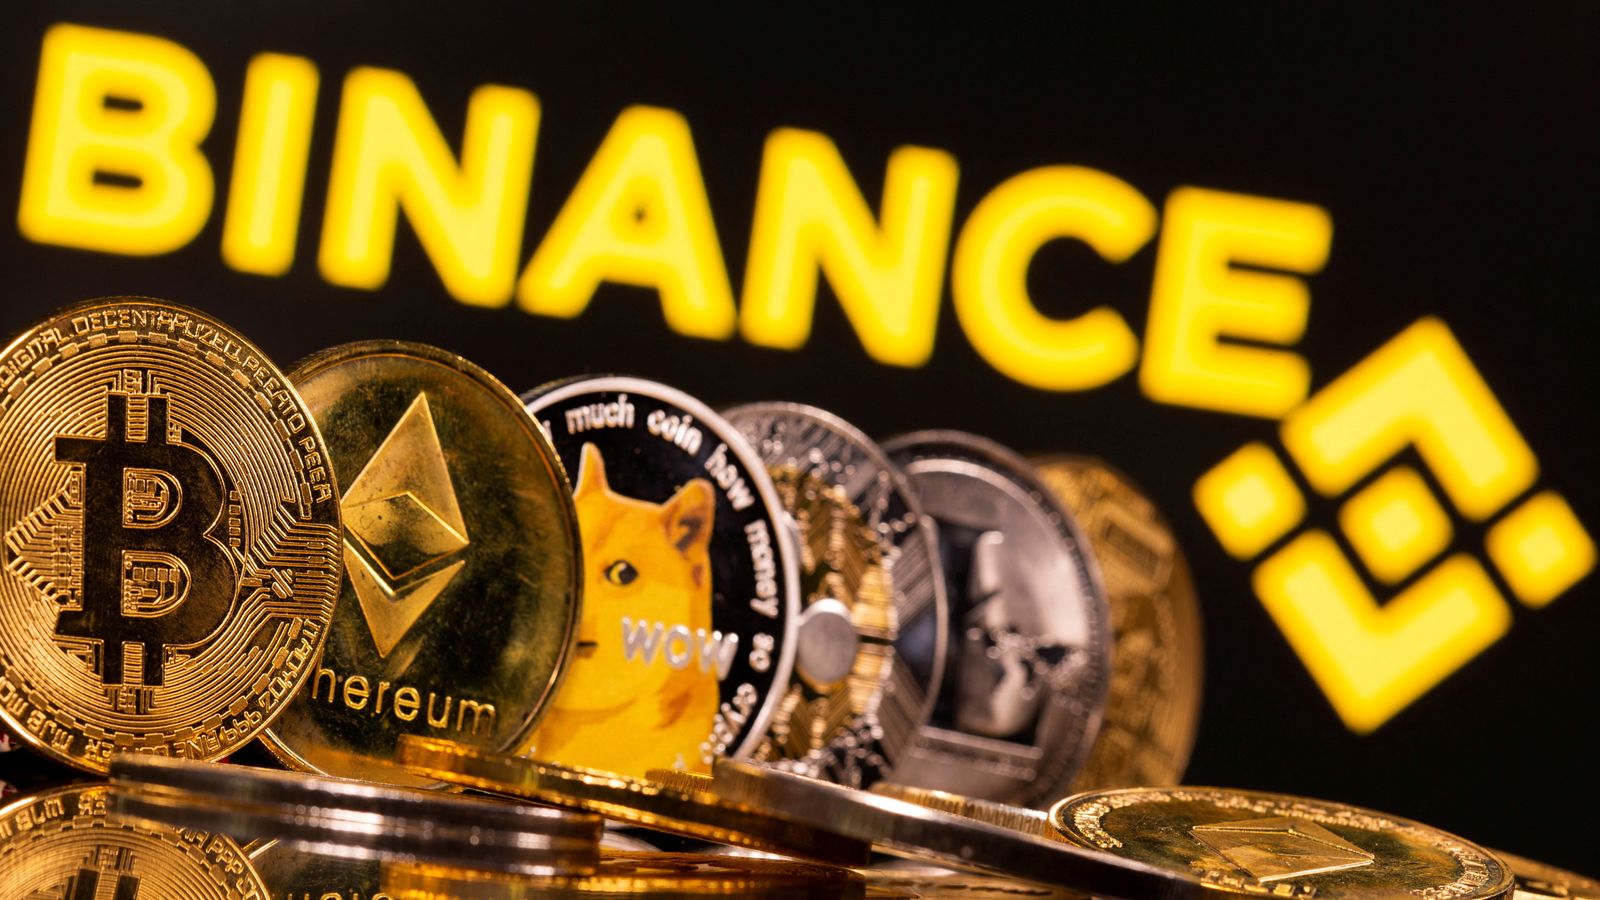 Binance Faces SEC Lawsuit for Misuse of Investor Funds and Misleading Practices